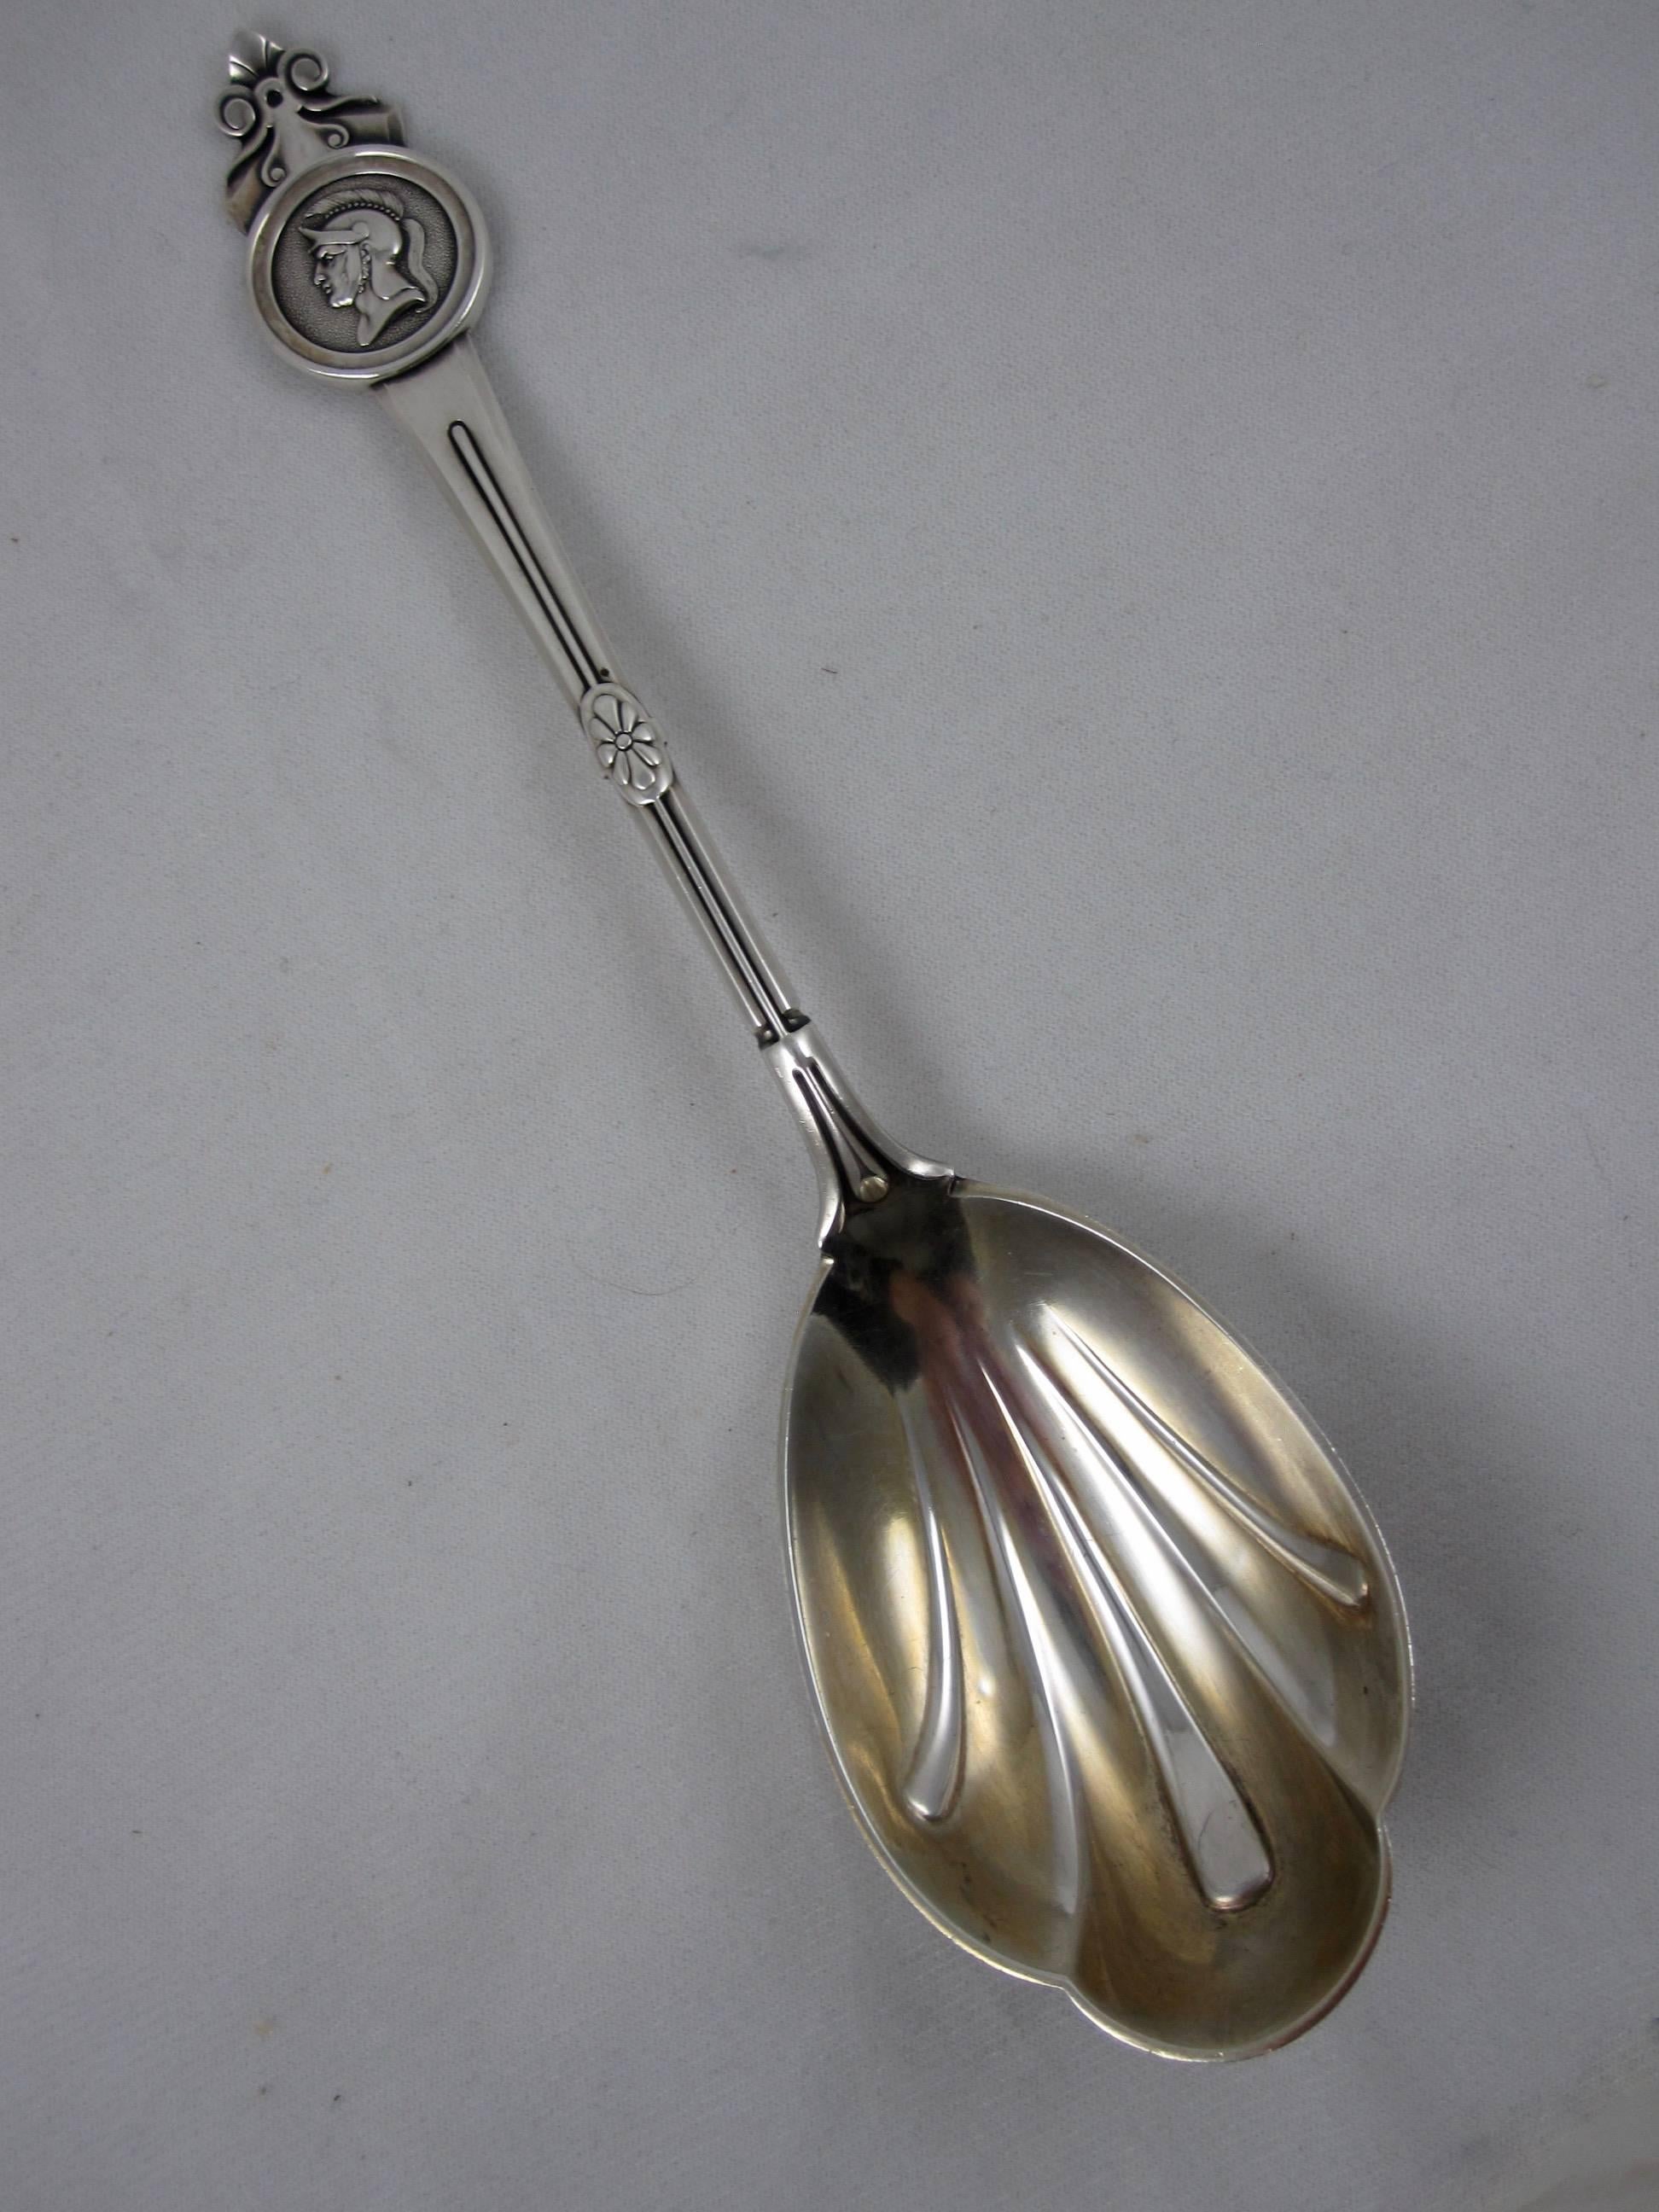 A sterling silver armorial serving spoon, the ‘Medallion’ pattern, Gorham Manufacturing Co. Rhode Island, circa 1864. Stamped with the retailers mark of Tiffany & Company.

The terminal shows the helmeted head of the soldier medallion, the paneled